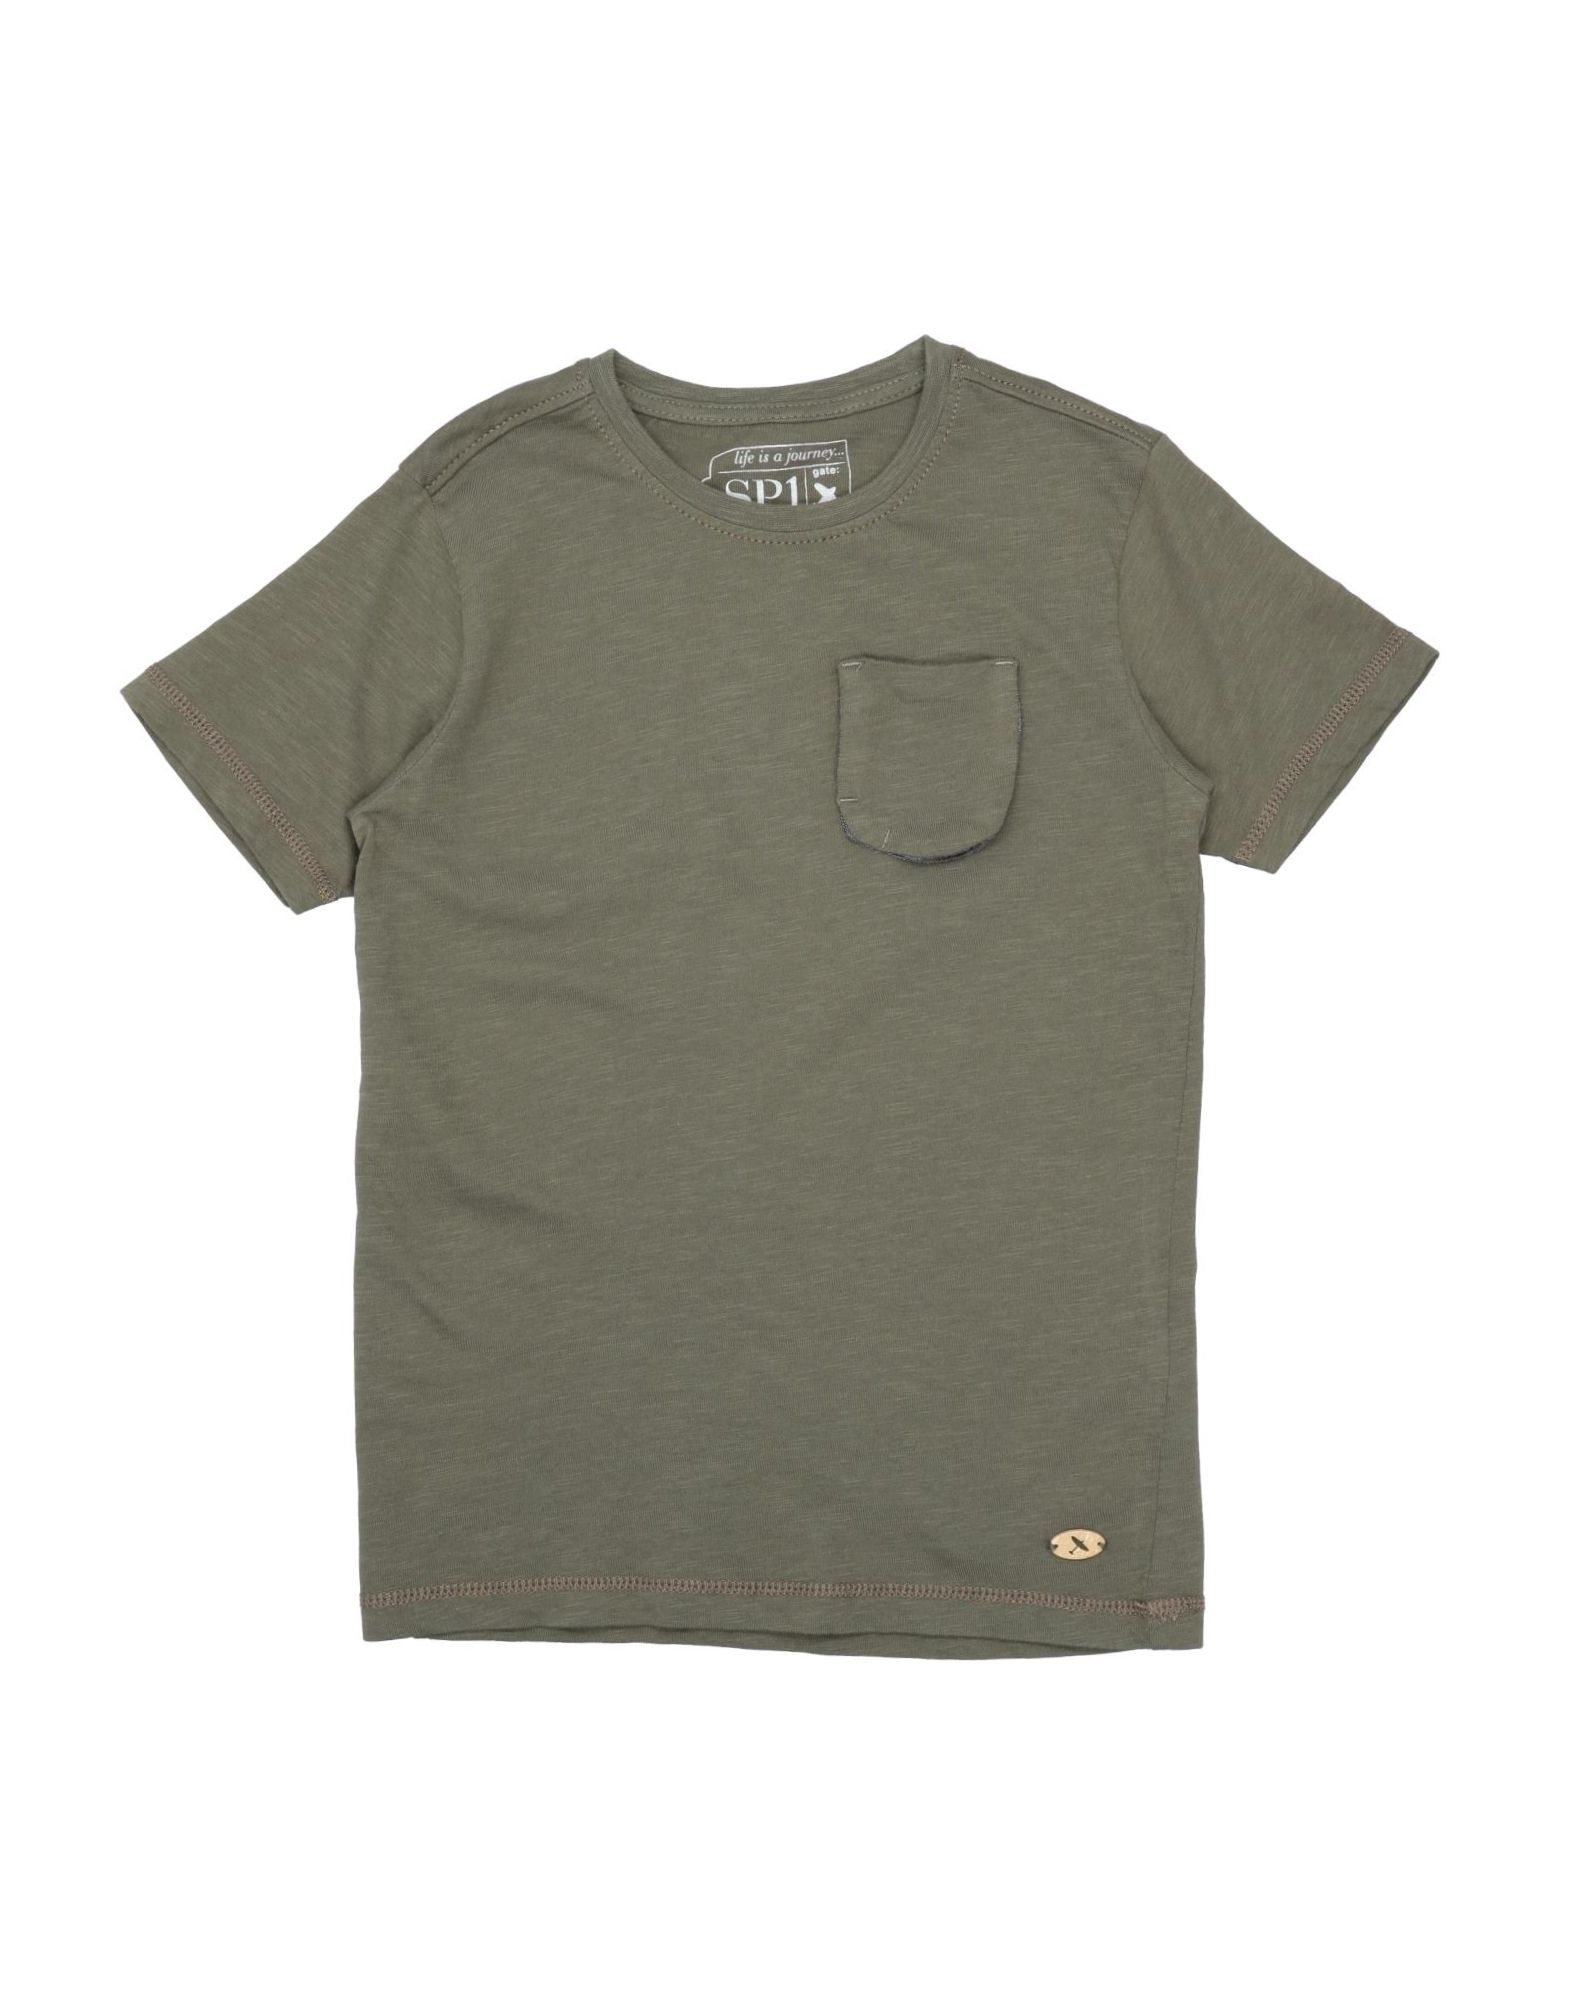 Sp1 Kids' T-shirts In Military Green